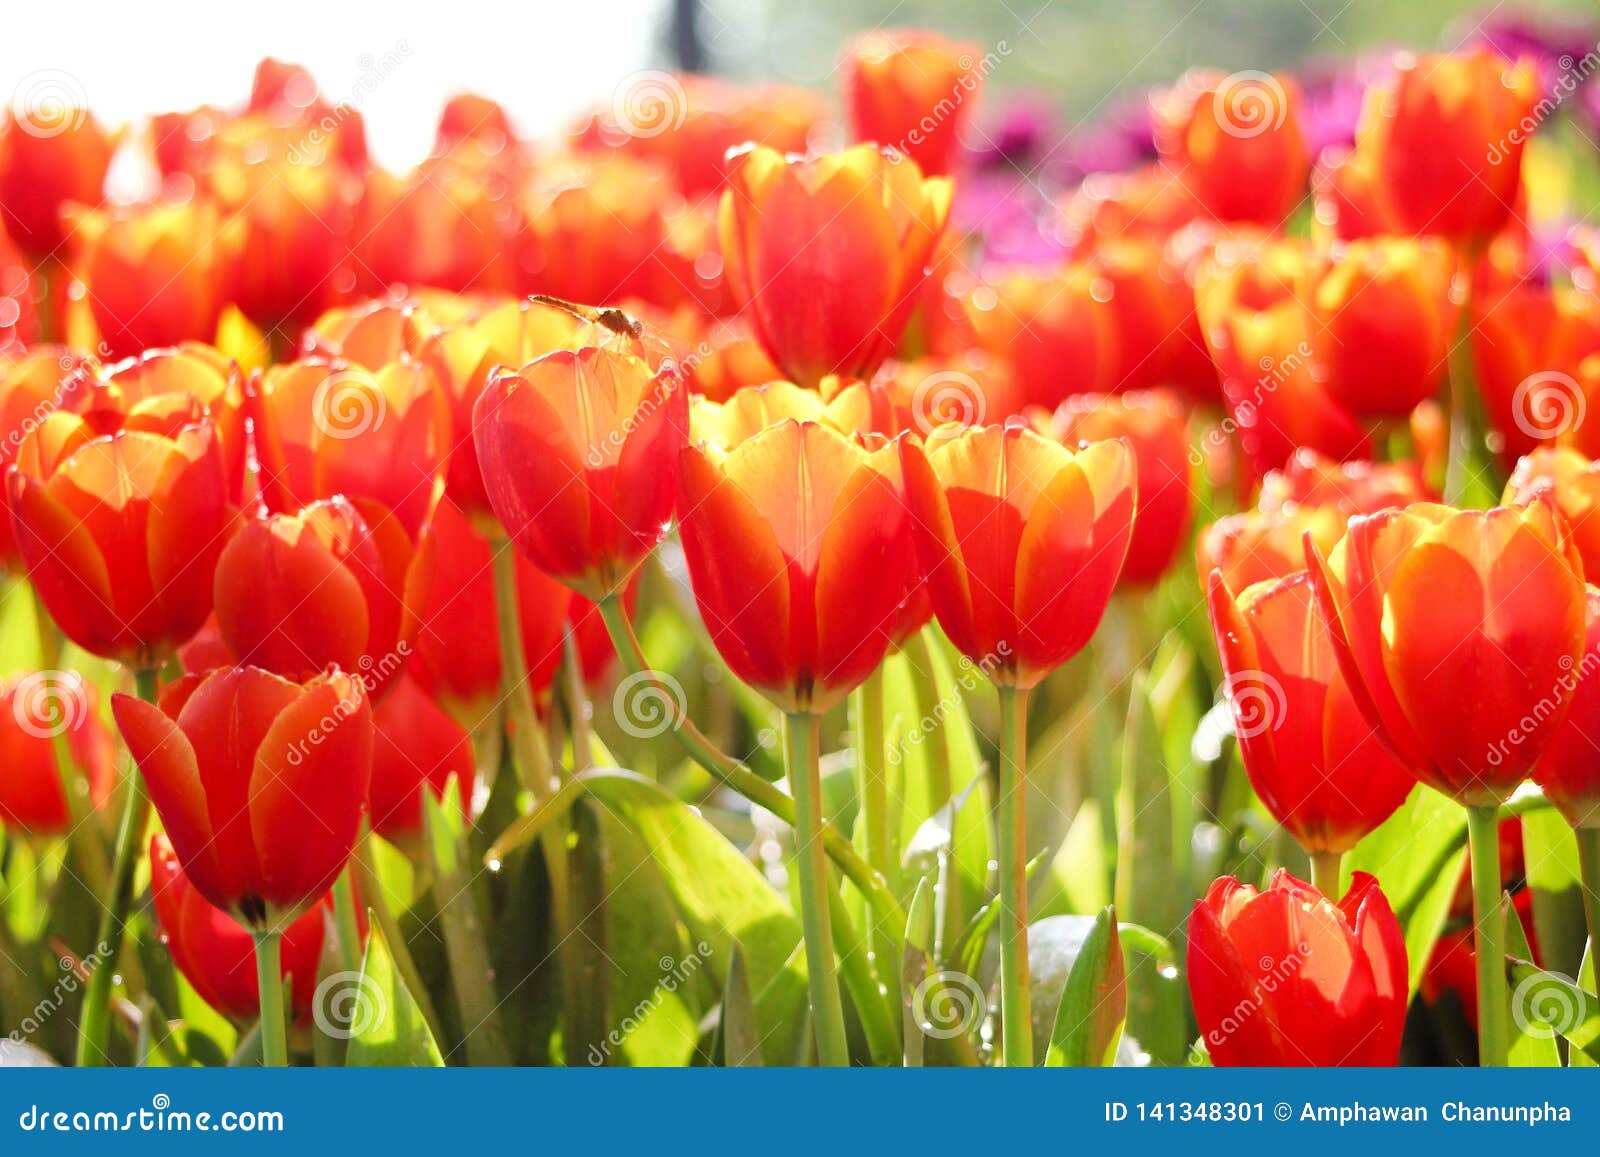 Close Up Patterns Nature of Colorful Ornamental Flowers Red and Yellow ...